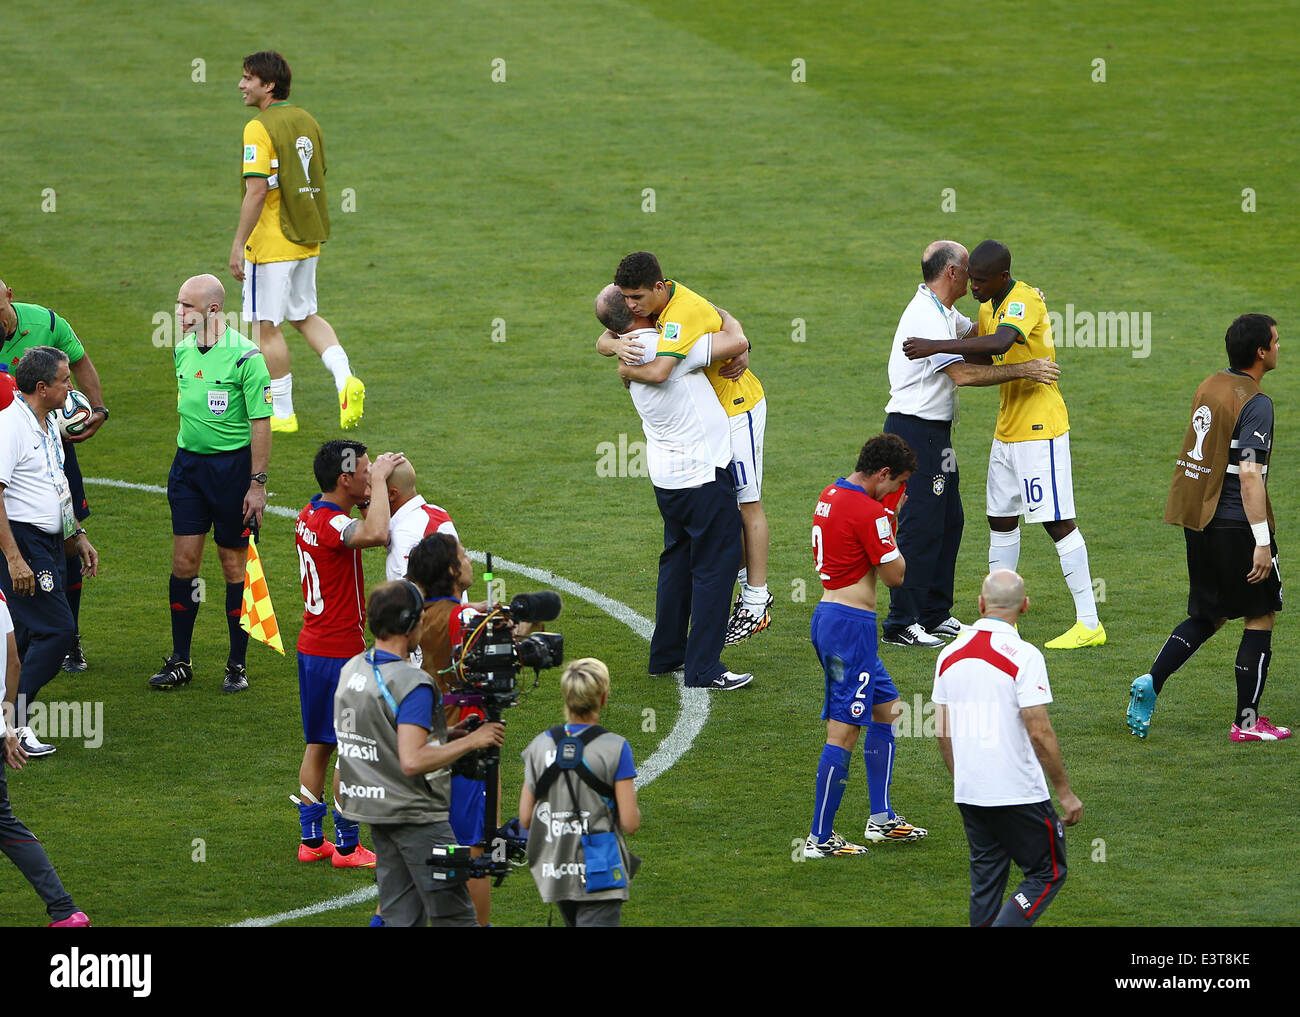 Belo Horizonte, Brazil. 28th June, 2014. Brazil's coach Luiz Felipe Scolari (C) celebrates the victory with Oscar after a Round of 16 match between Brazil and Chile of 2014 FIFA World Cup at the Estadio Mineirao Stadium in Belo Horizonte, Brazil, on June 28, 2014. Brazil won 4-3 (3-2 in penalties) over Chile and qualified for Quarter-finals on Saturday. Credit:  Liu Bin/Xinhua/Alamy Live News Stock Photo